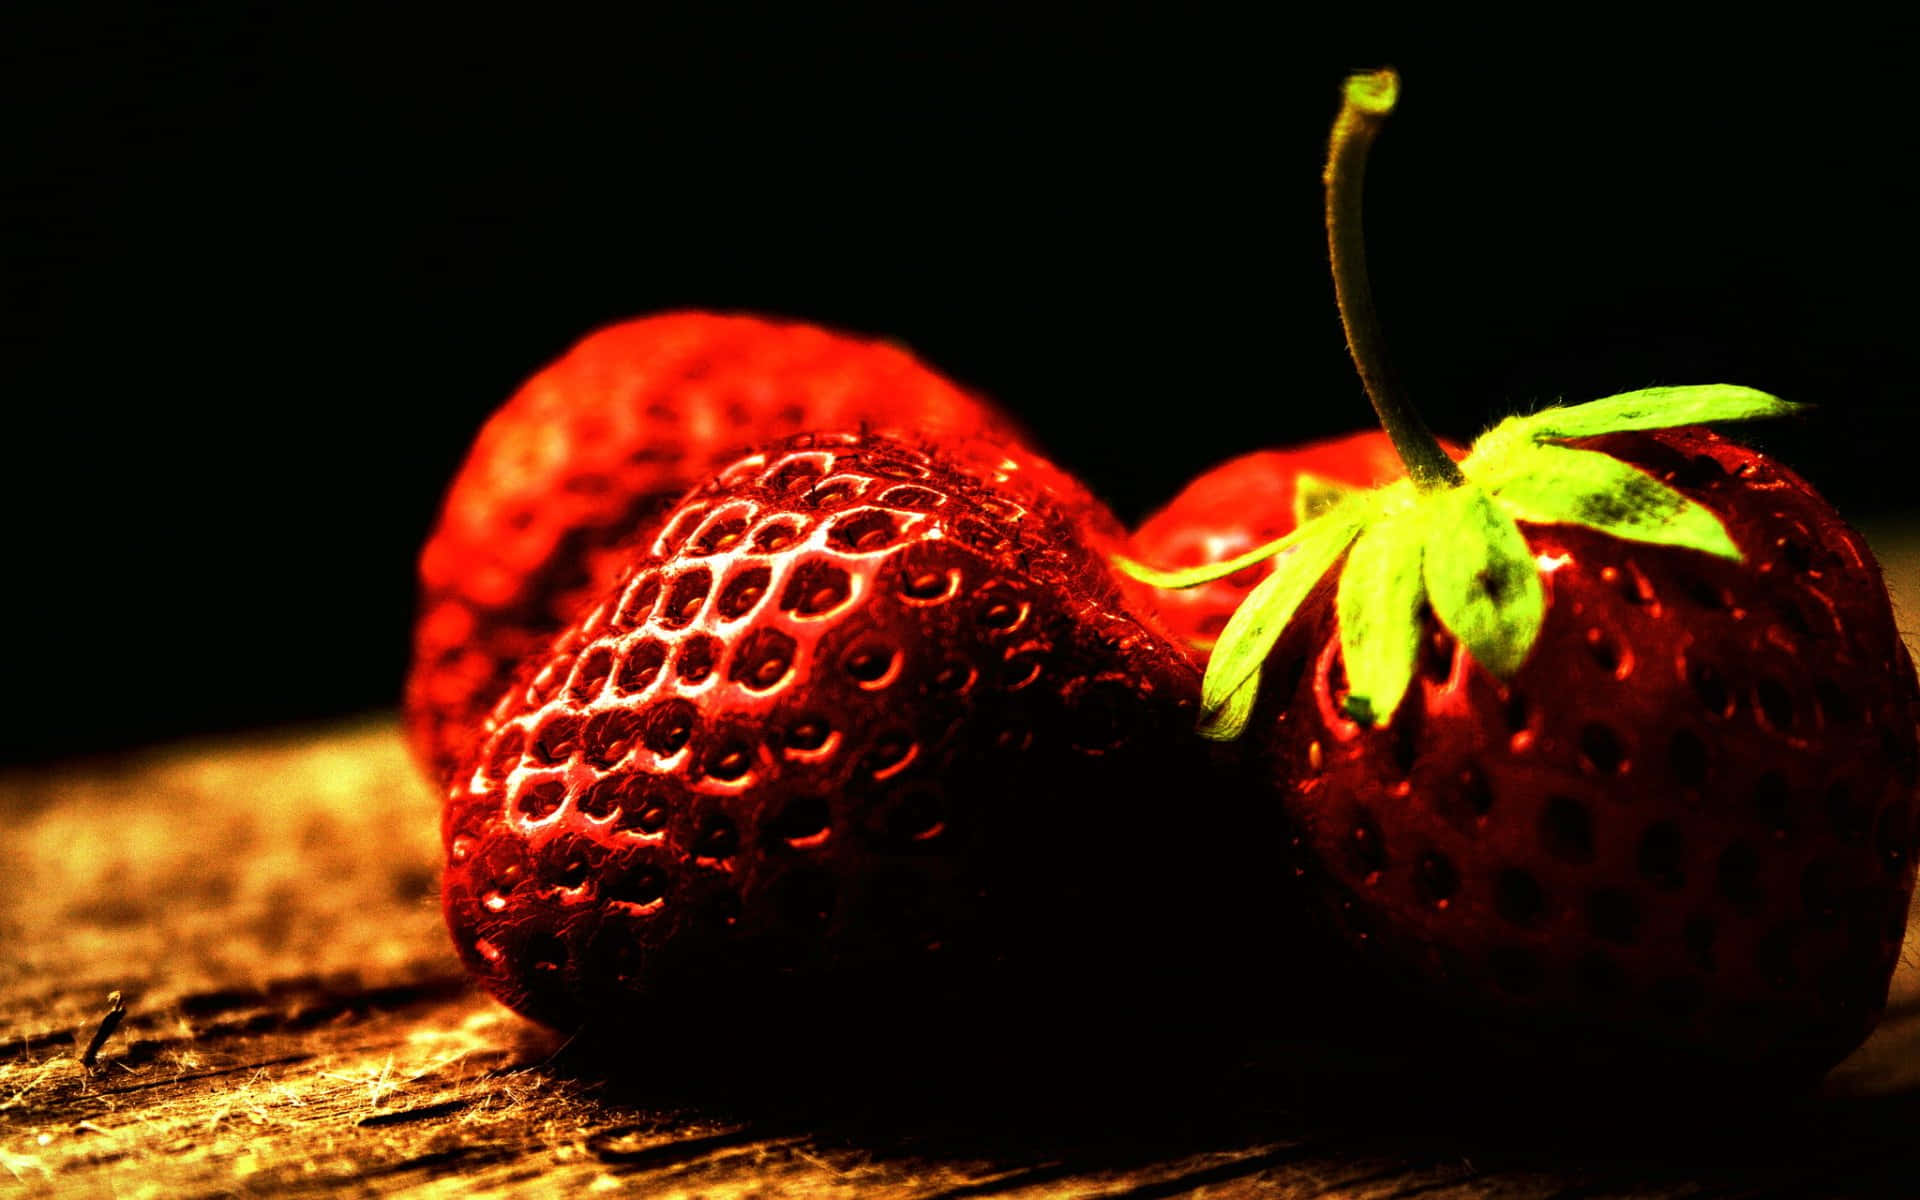 "A beautiful and delicious strawberry in the summertime."